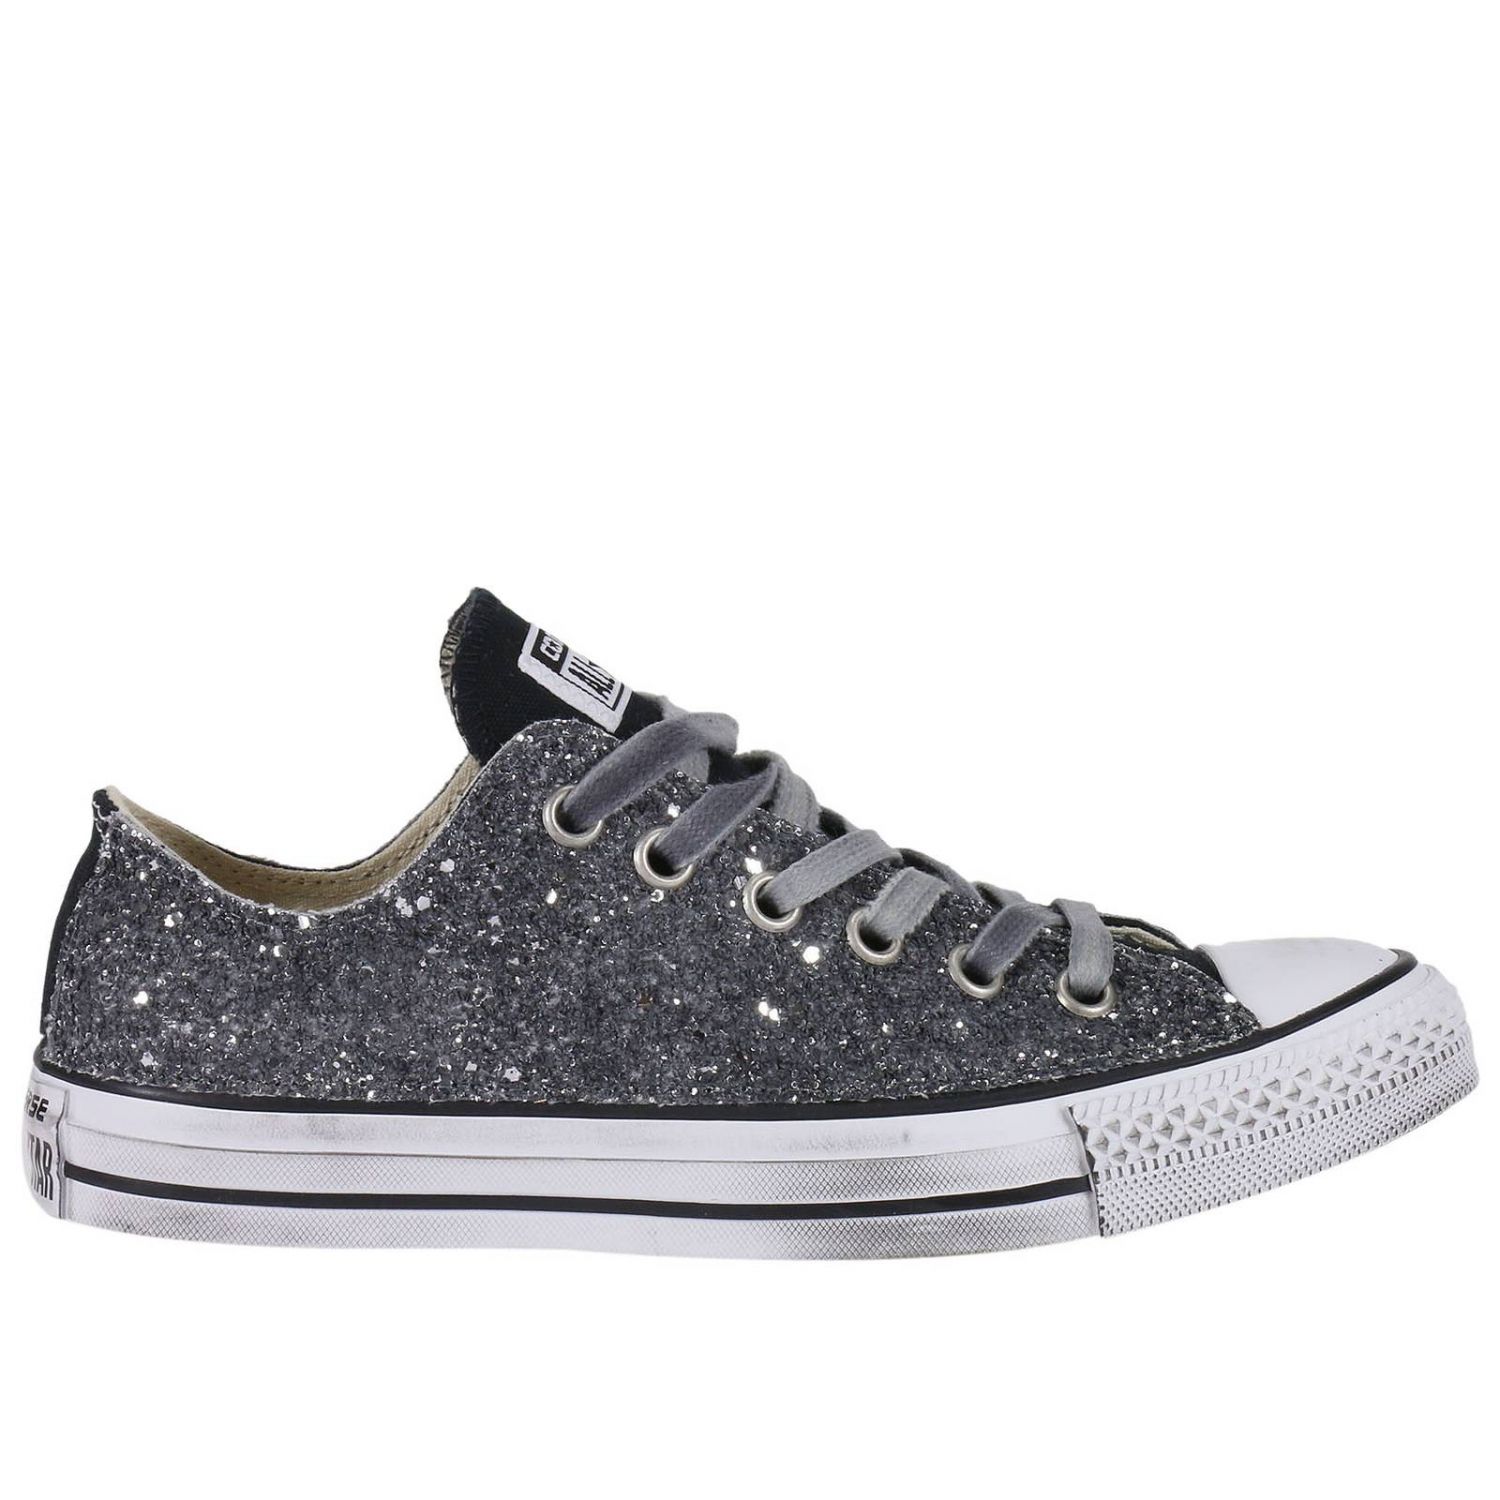 Sneaker All Star Limited Edition in canvas con glitter | Sneakers Converse  Limited Edition Donna Argento | Sneakers Converse Limited Edition 156907C  Giglio IT